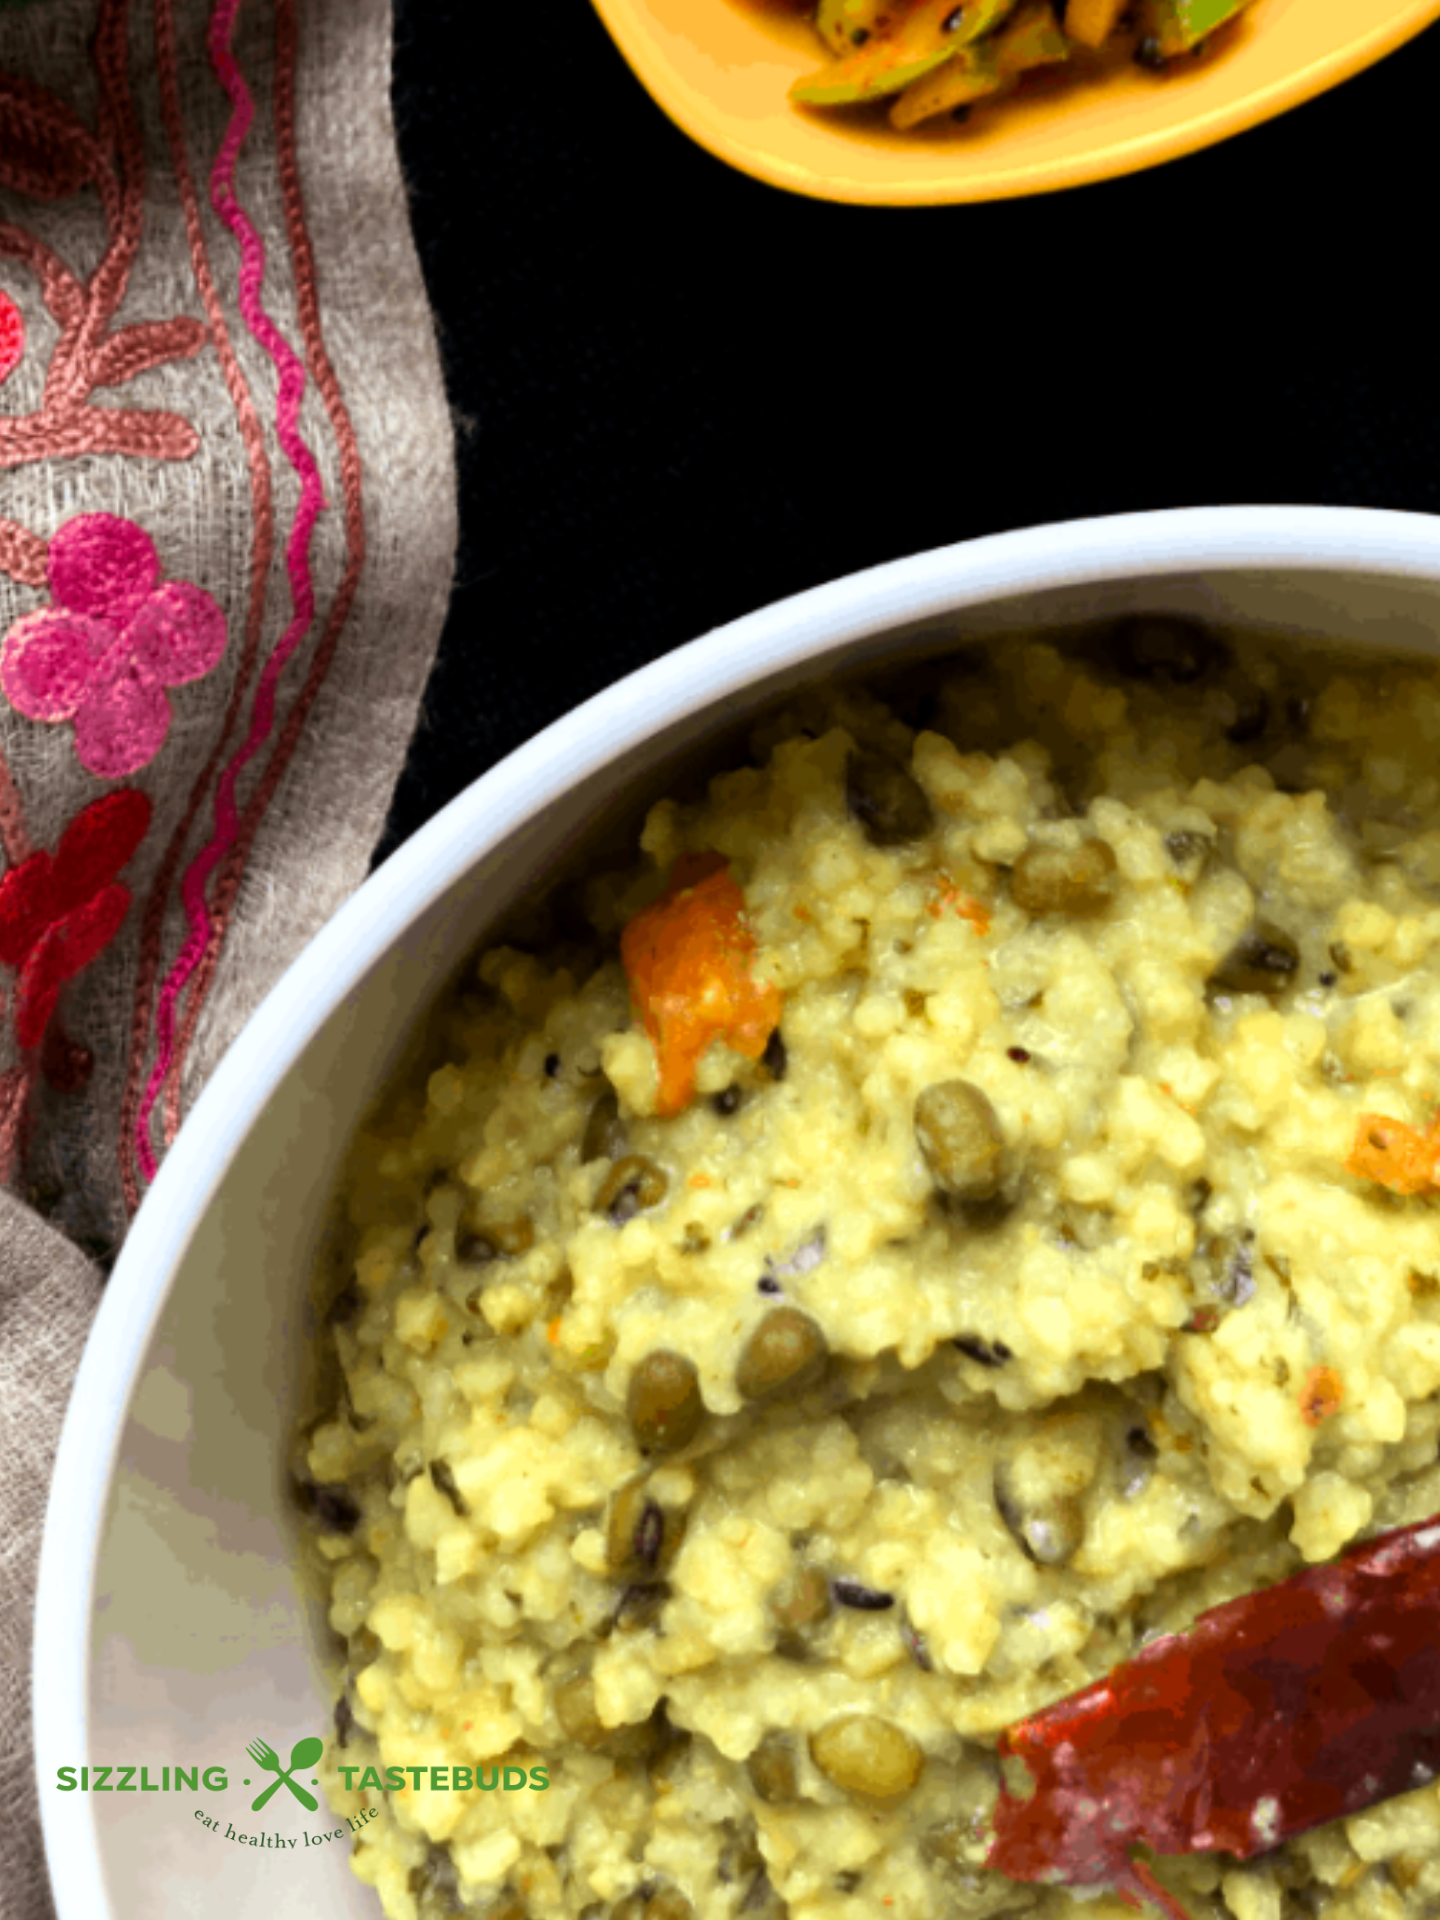 Moong Sama Chashwali Khichdi is a Gluten Free, millet based Nutritious One pot meal. Perfect for brunch or a light dinner.